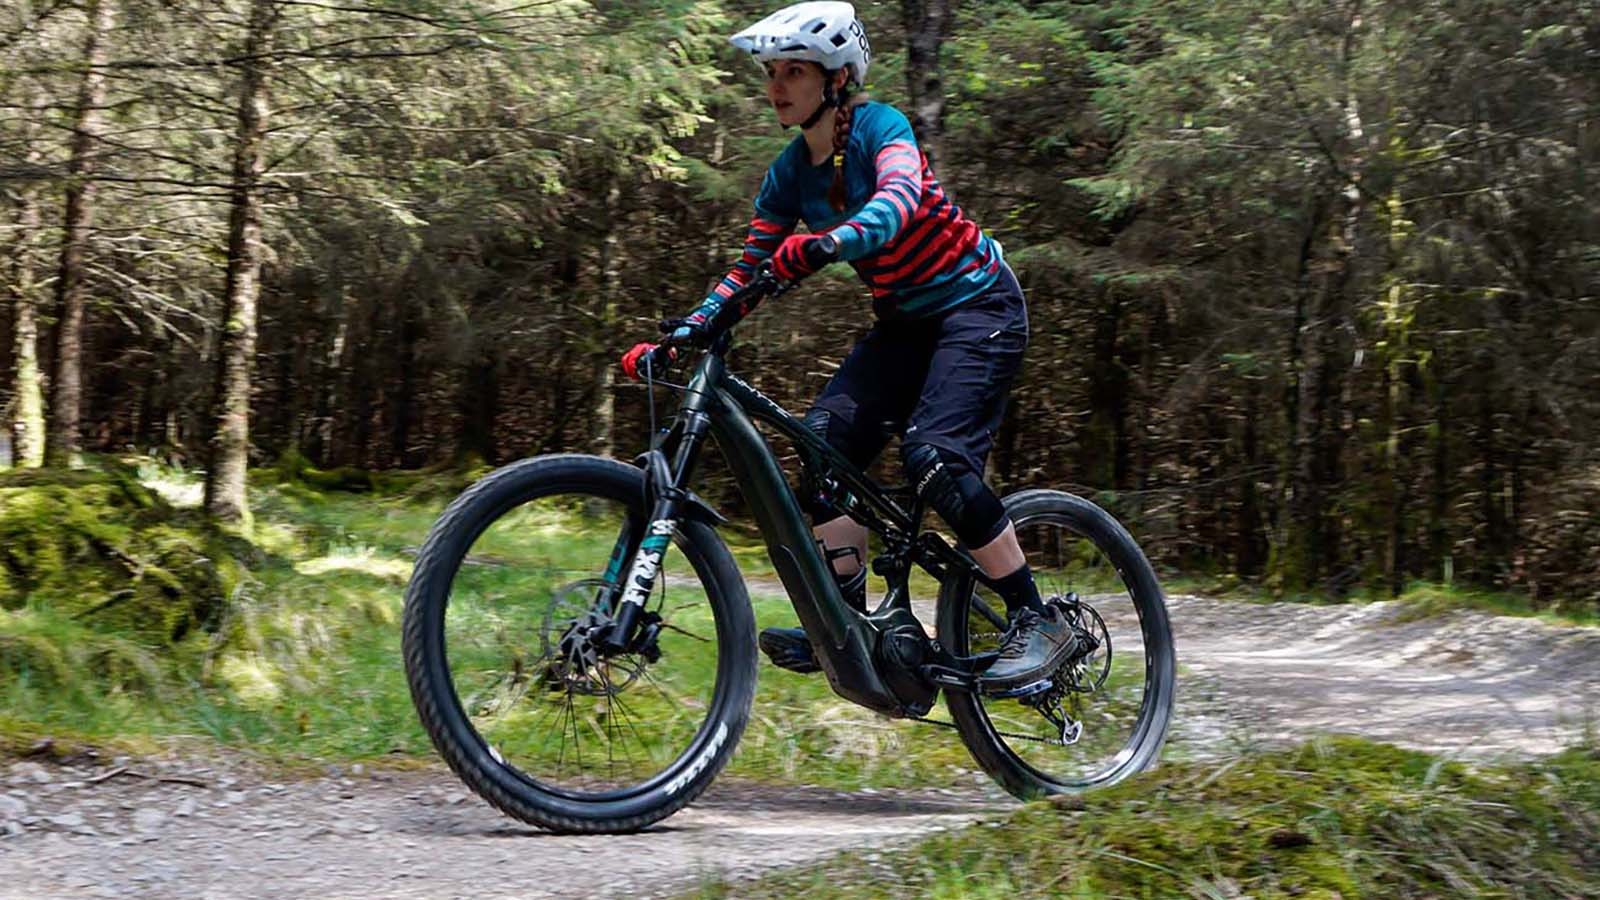 Whyte E-160 RS